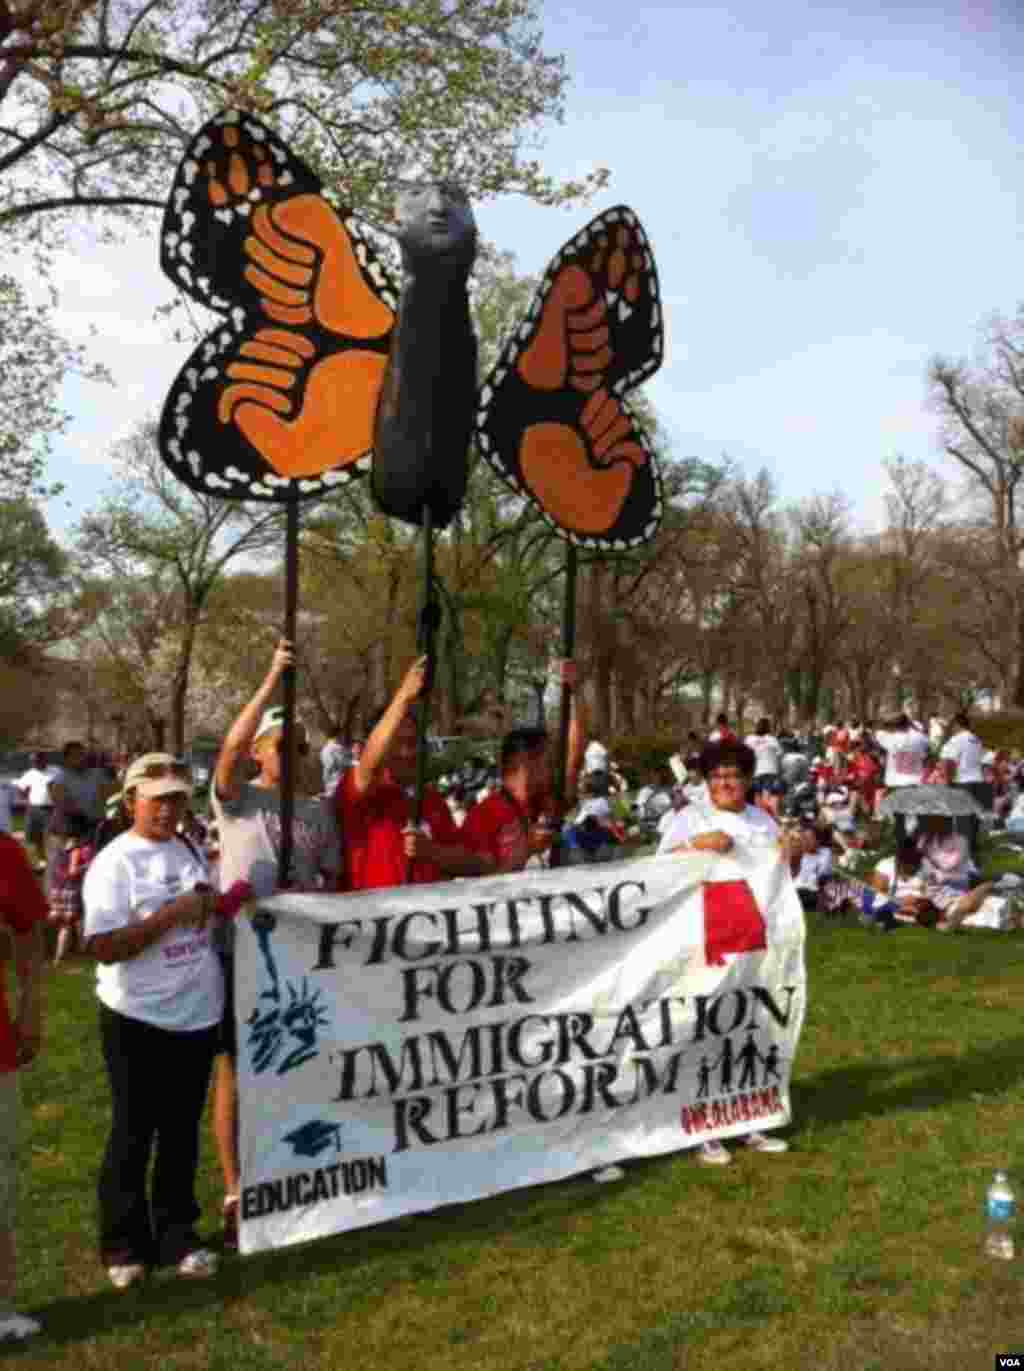 Some camps of the U.S. immigration reform movement have adopted the symbol of the butterfly, which migrates from south to north. (Photo by Carolyn Presutti)